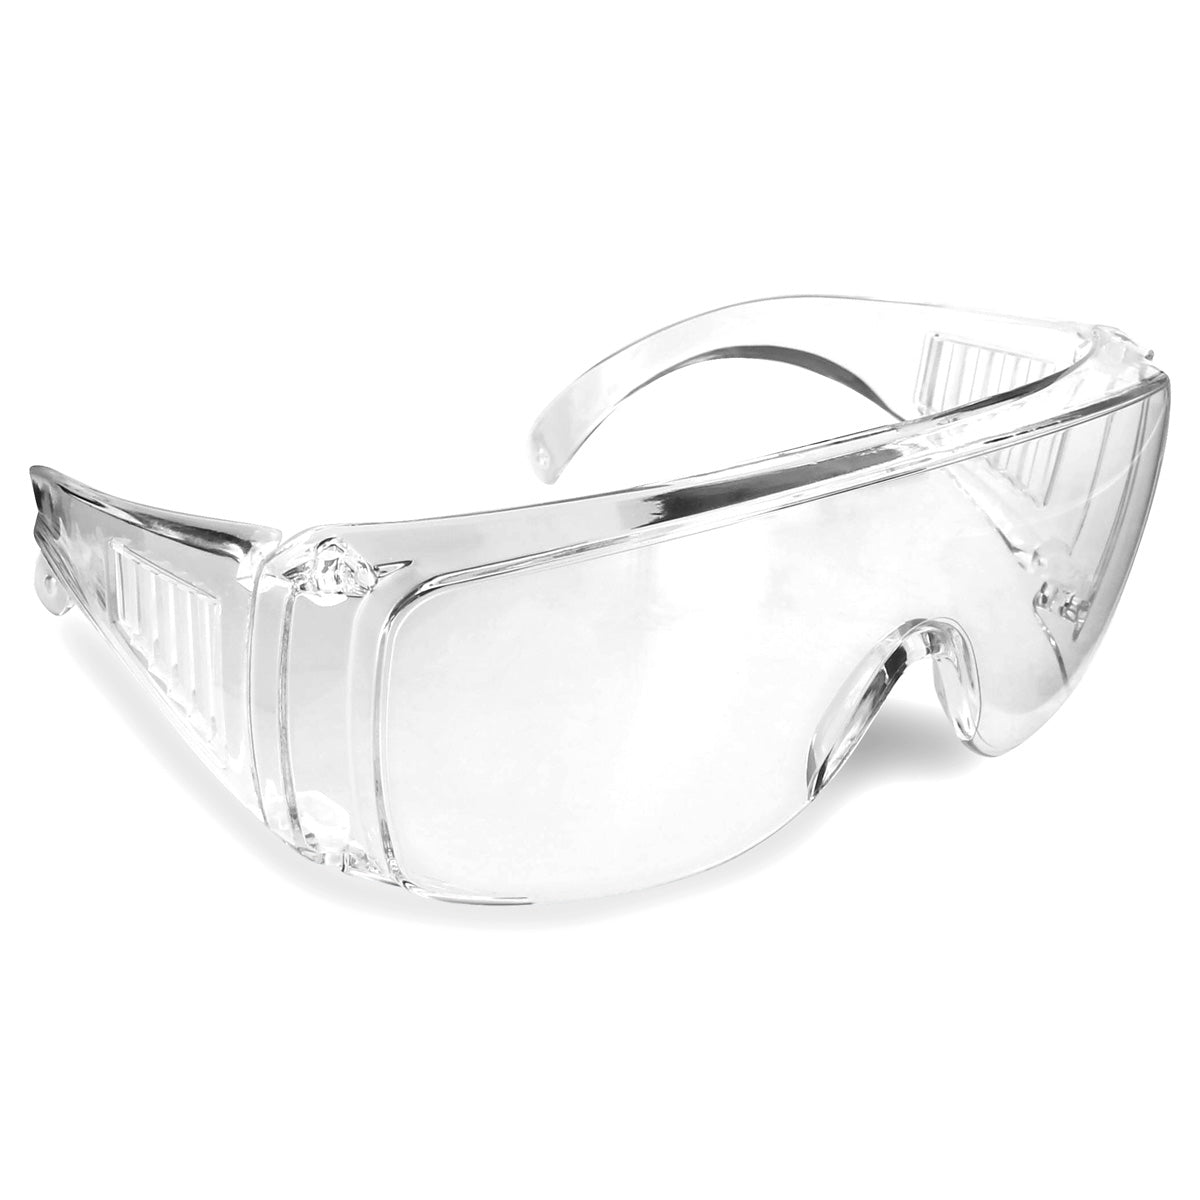 Rugged Blue Visitor Glasses - 12 Pair